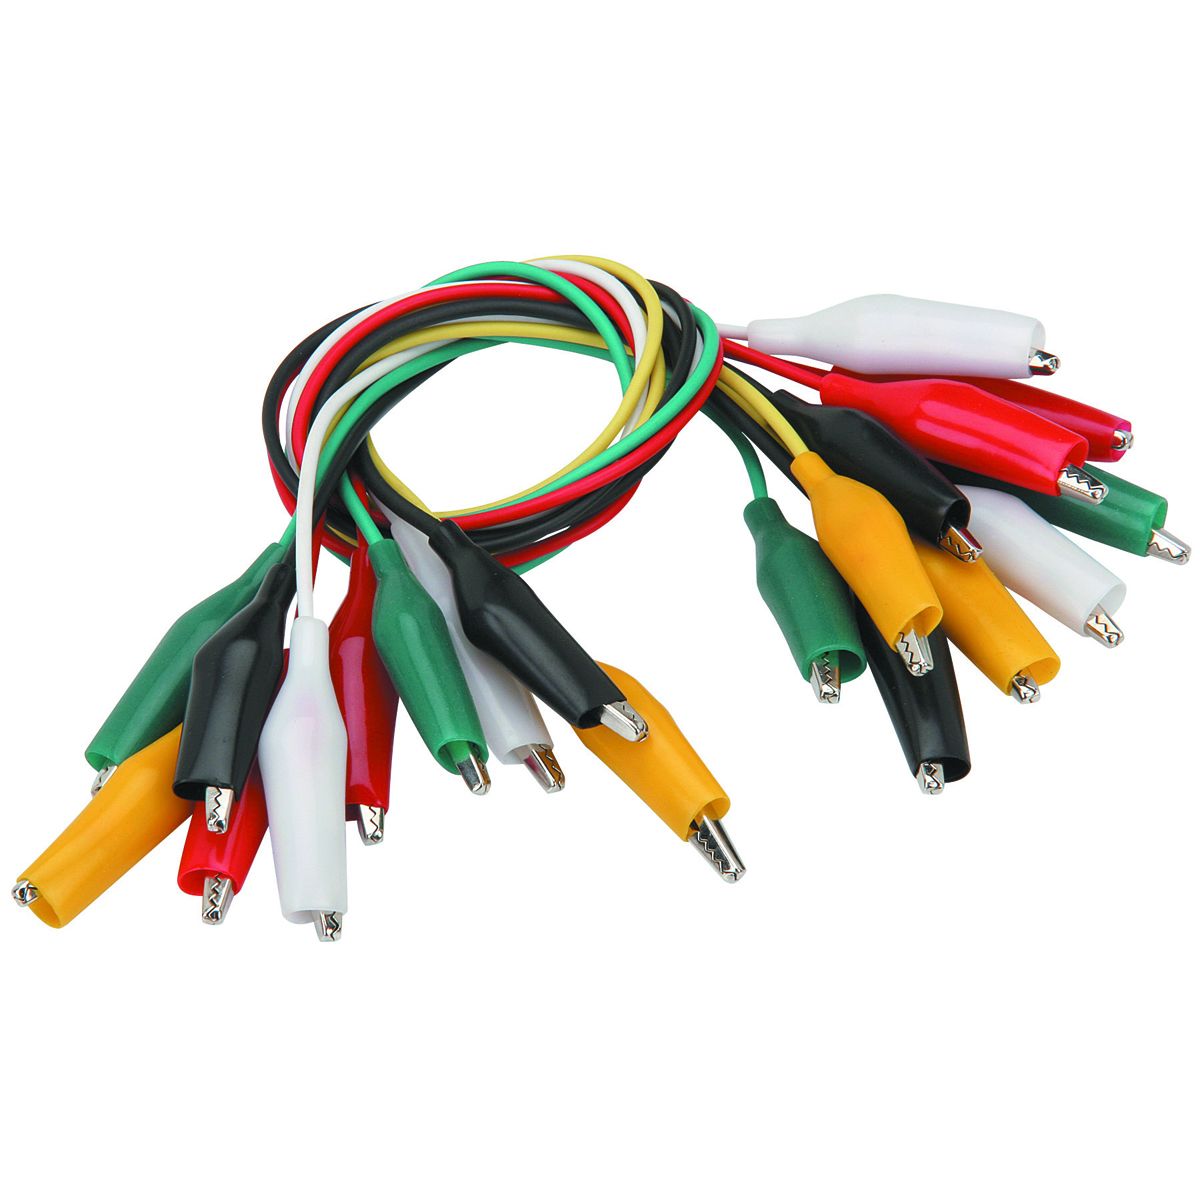 CEN-TECH 18 in. 5 Colors Test Lead and Alligator Clips Set